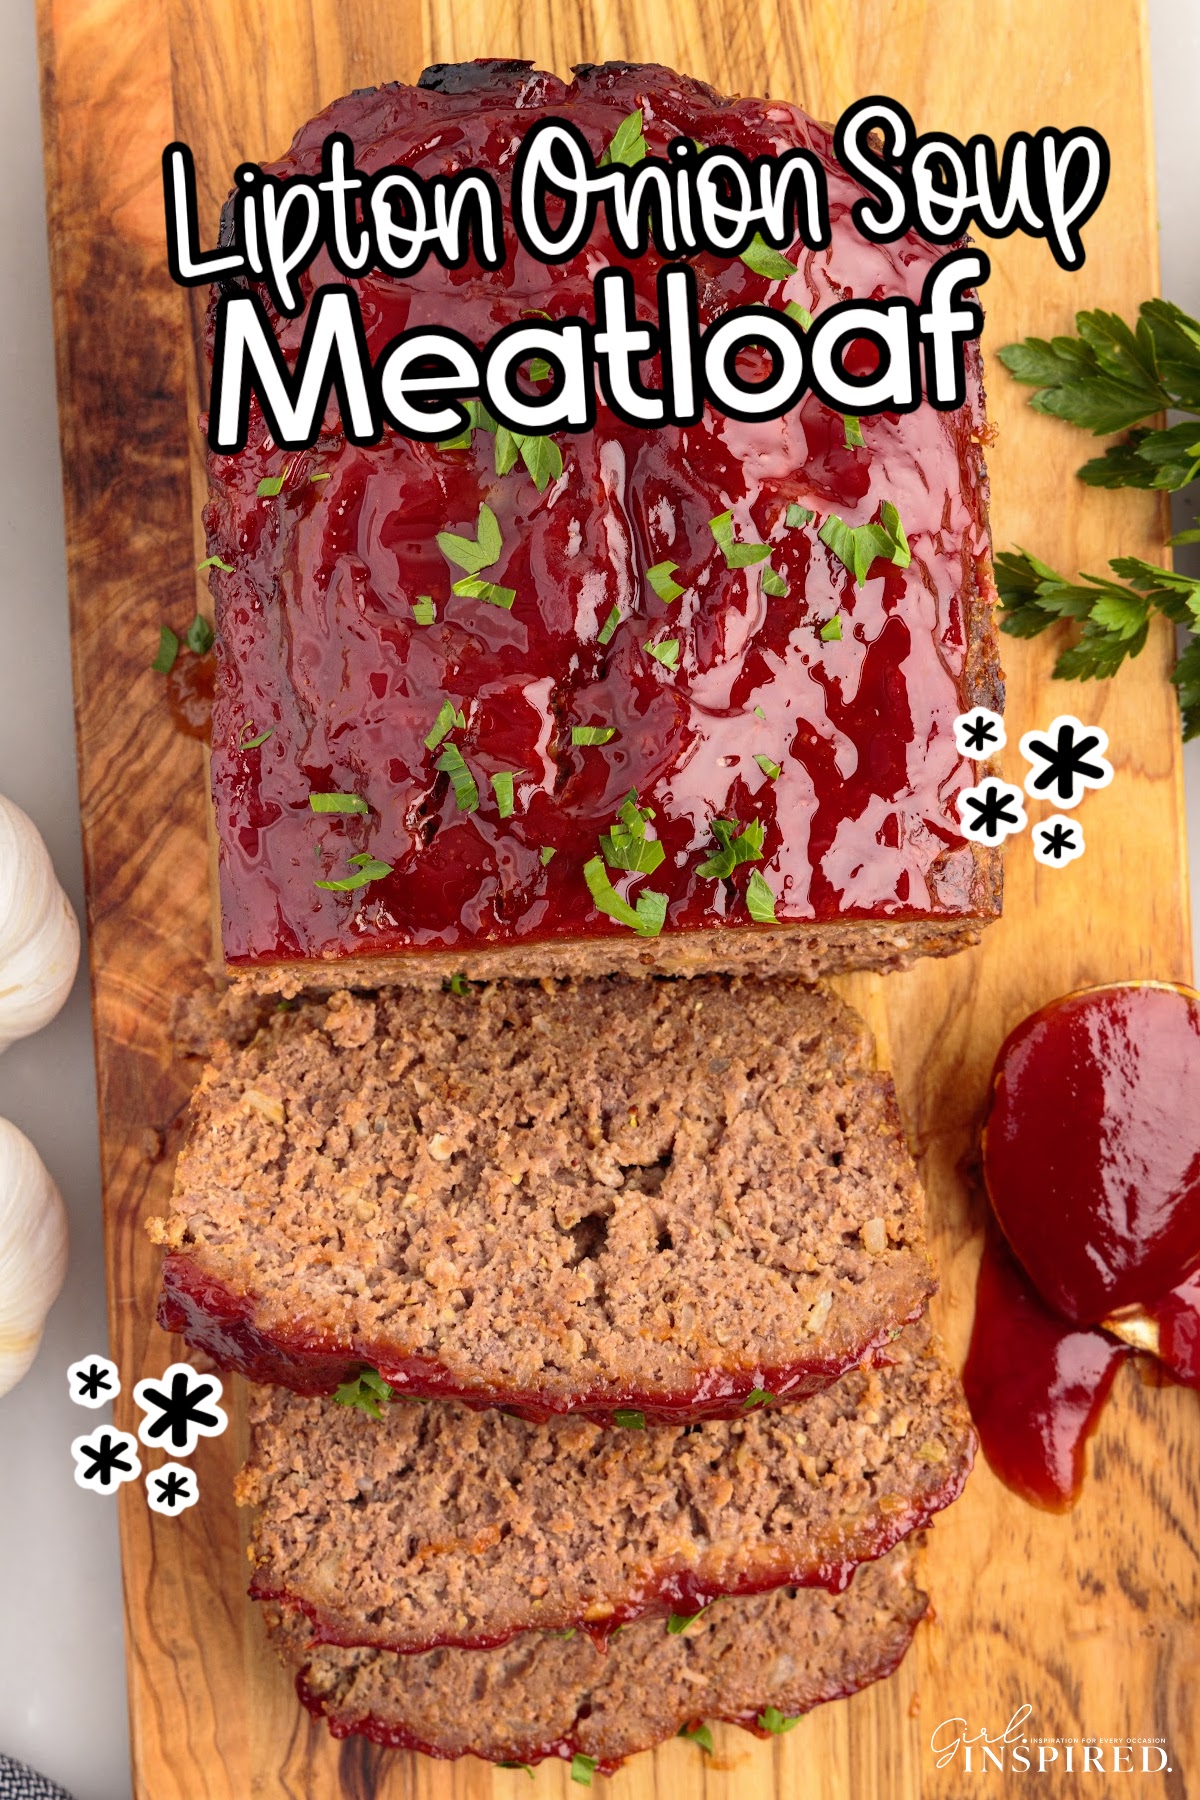 Overhead view of Lipton Onion Soup Meatloaf on a cutting board with three slices cut with text overlay.